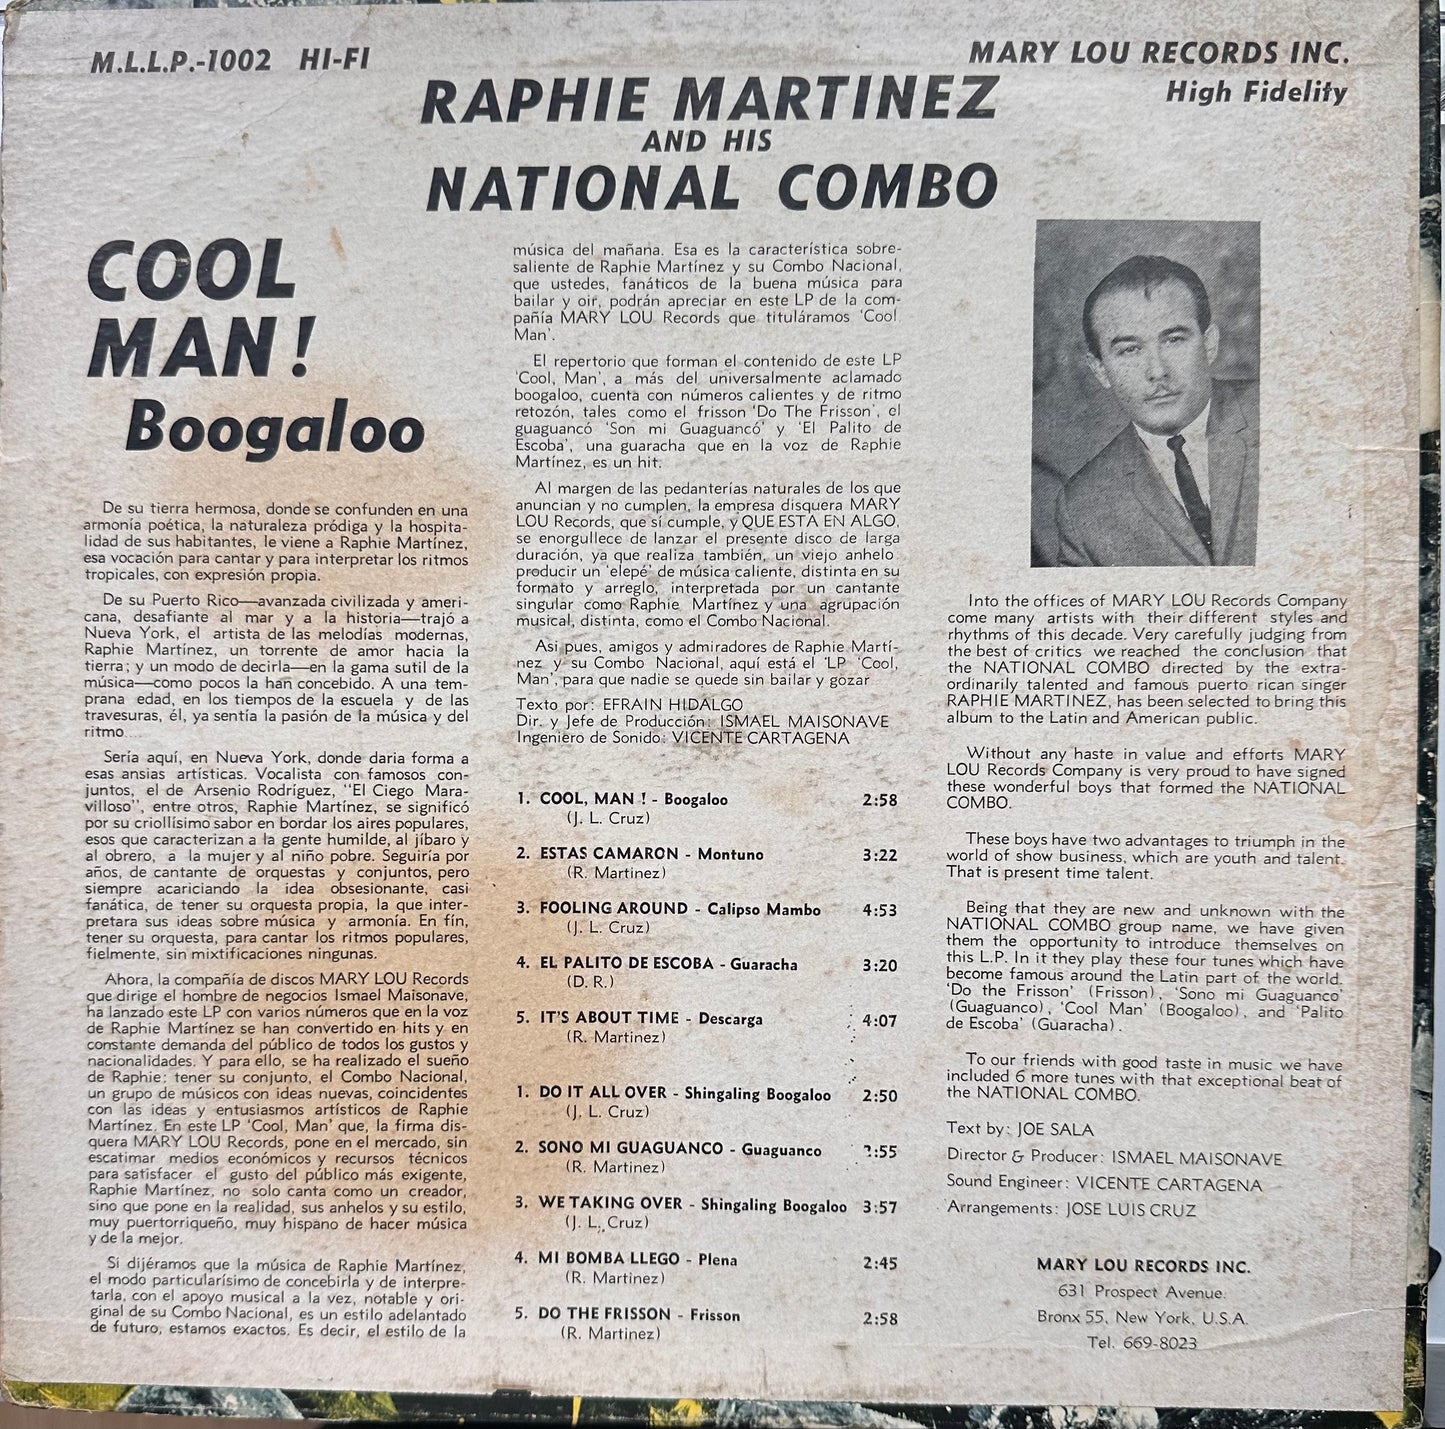 Cool Man! - Raphie Martinez and his Combo